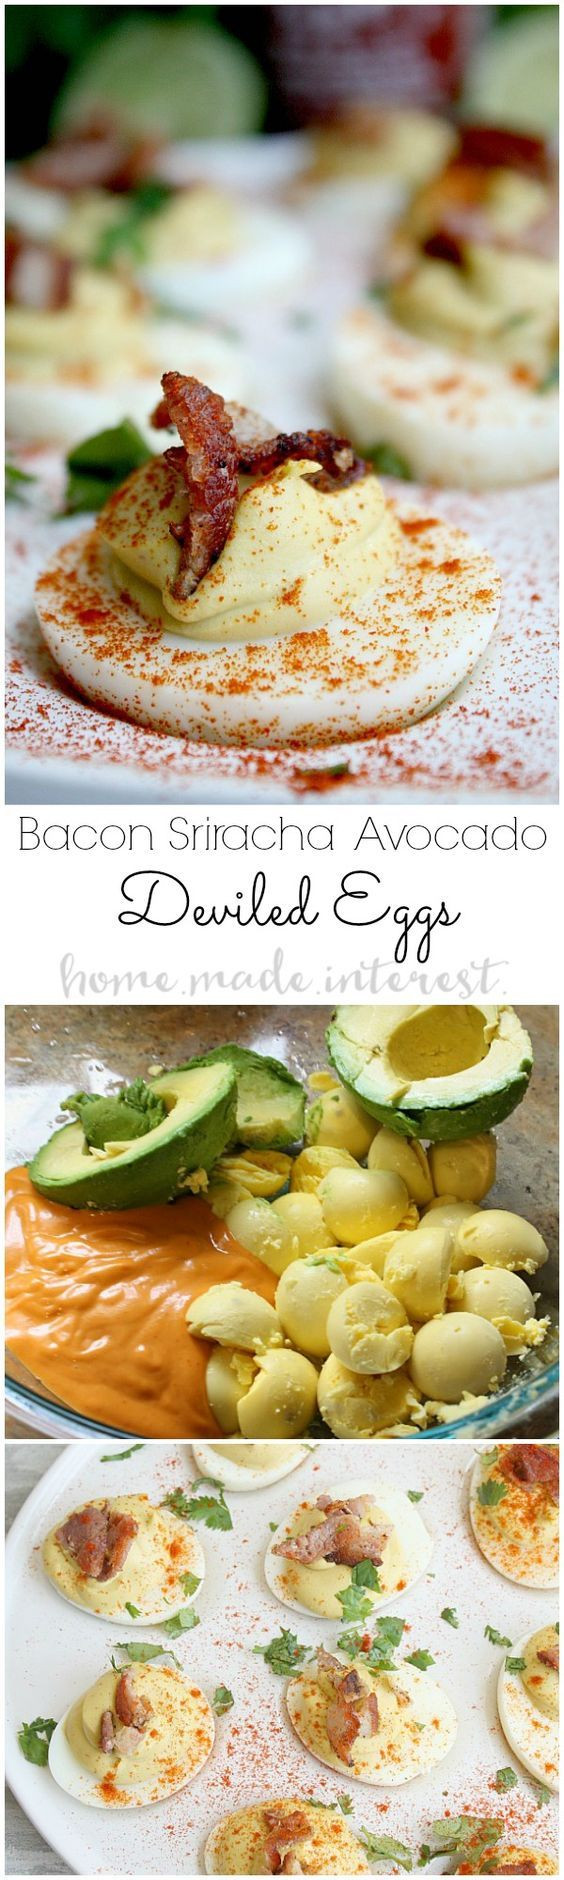 Low Carb Easter Dinner
 Pinterest • The world’s catalog of ideas